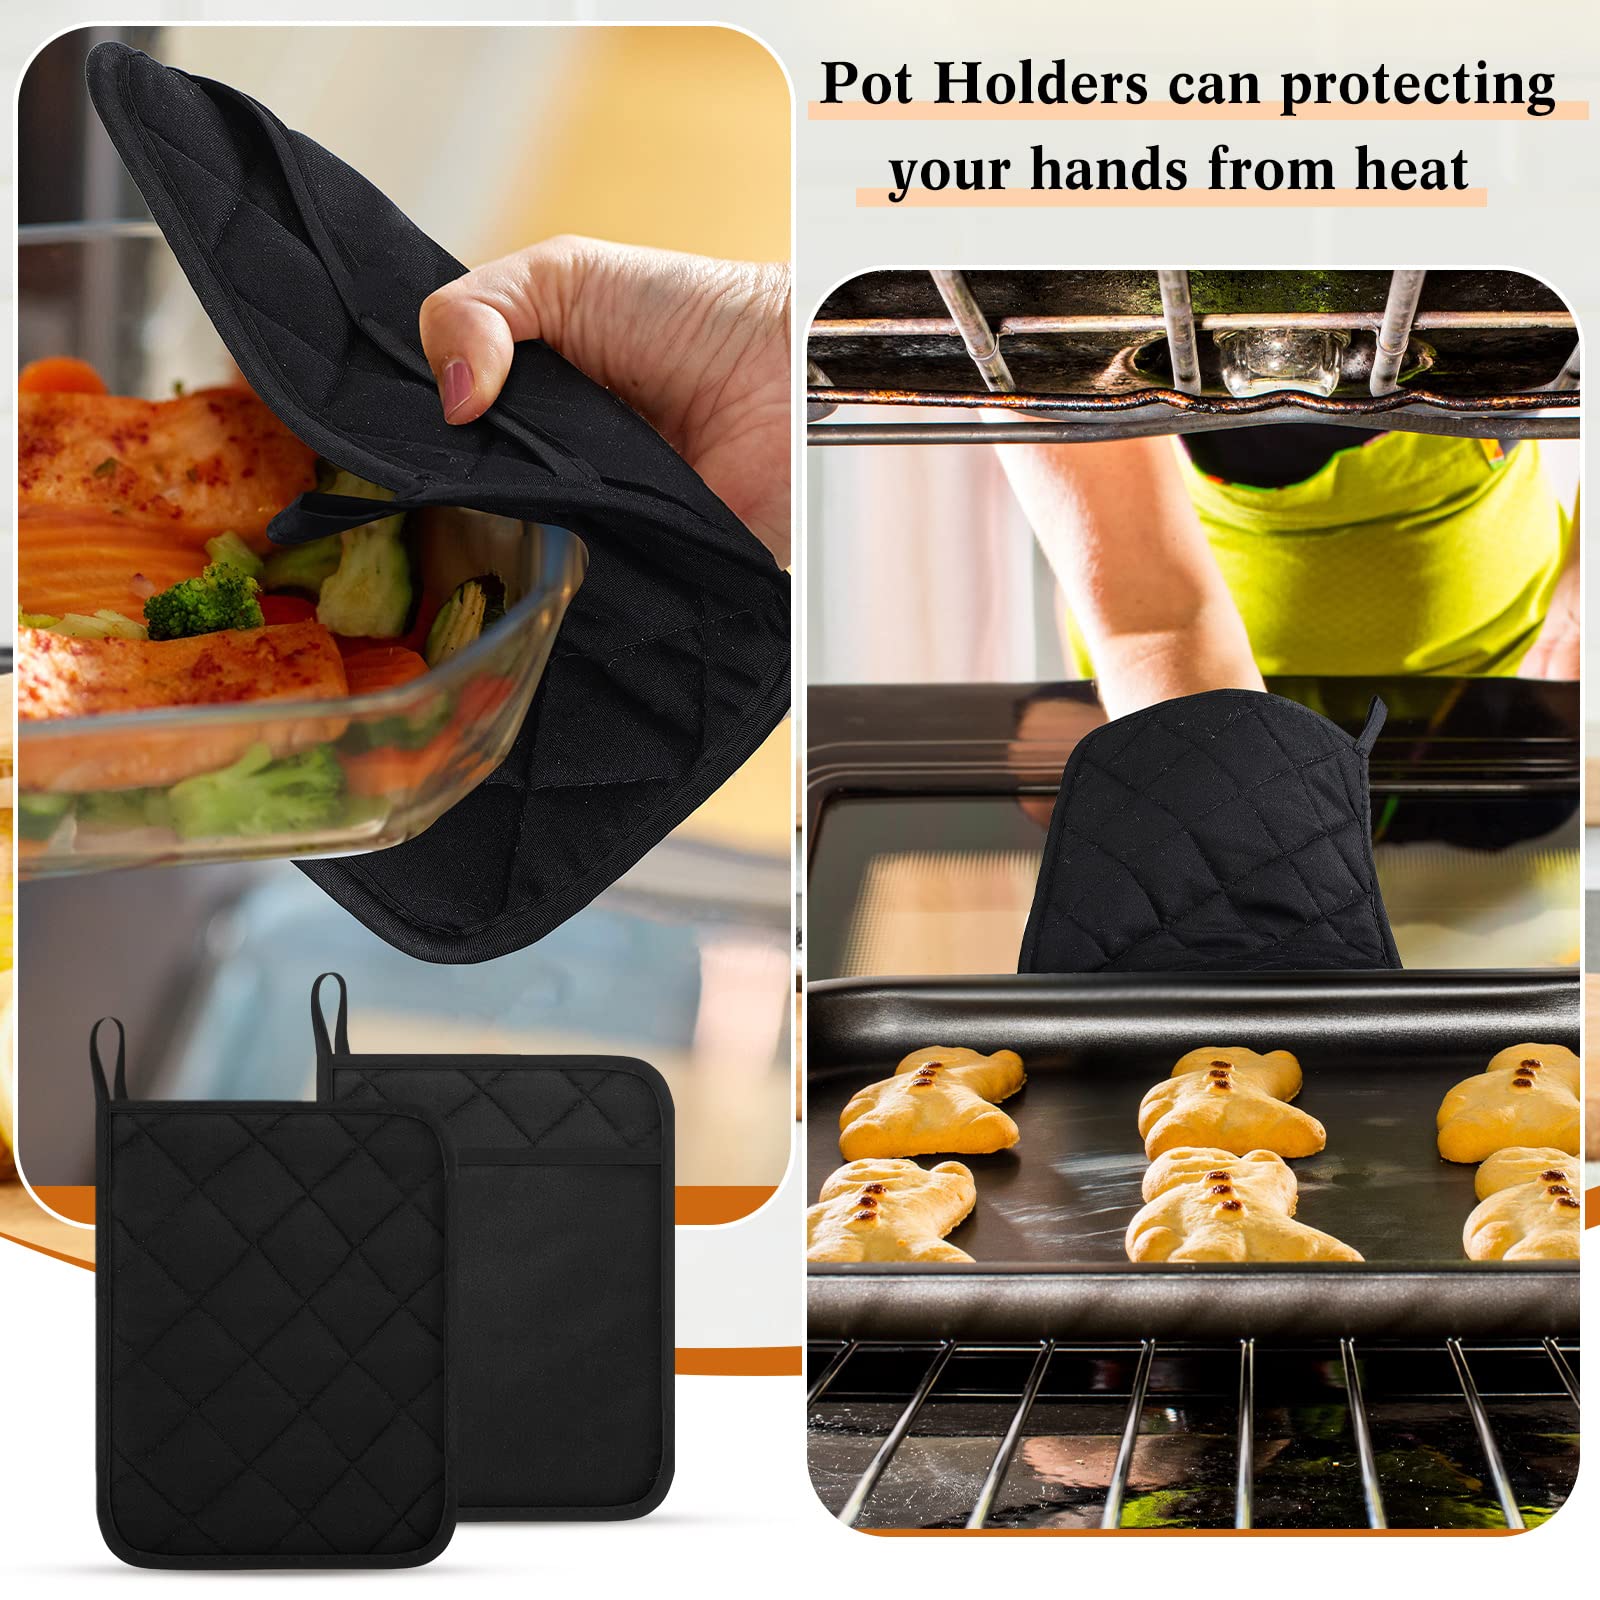 Hoolerry 20 Pieces Cotton Pocket Pot Holders for Kitchen Oven DIY Pot Holders 7 x 9 Inch Heat Resistance Pot Holder Pot Holders with Hanging Loops for Baking Accessories(Black)